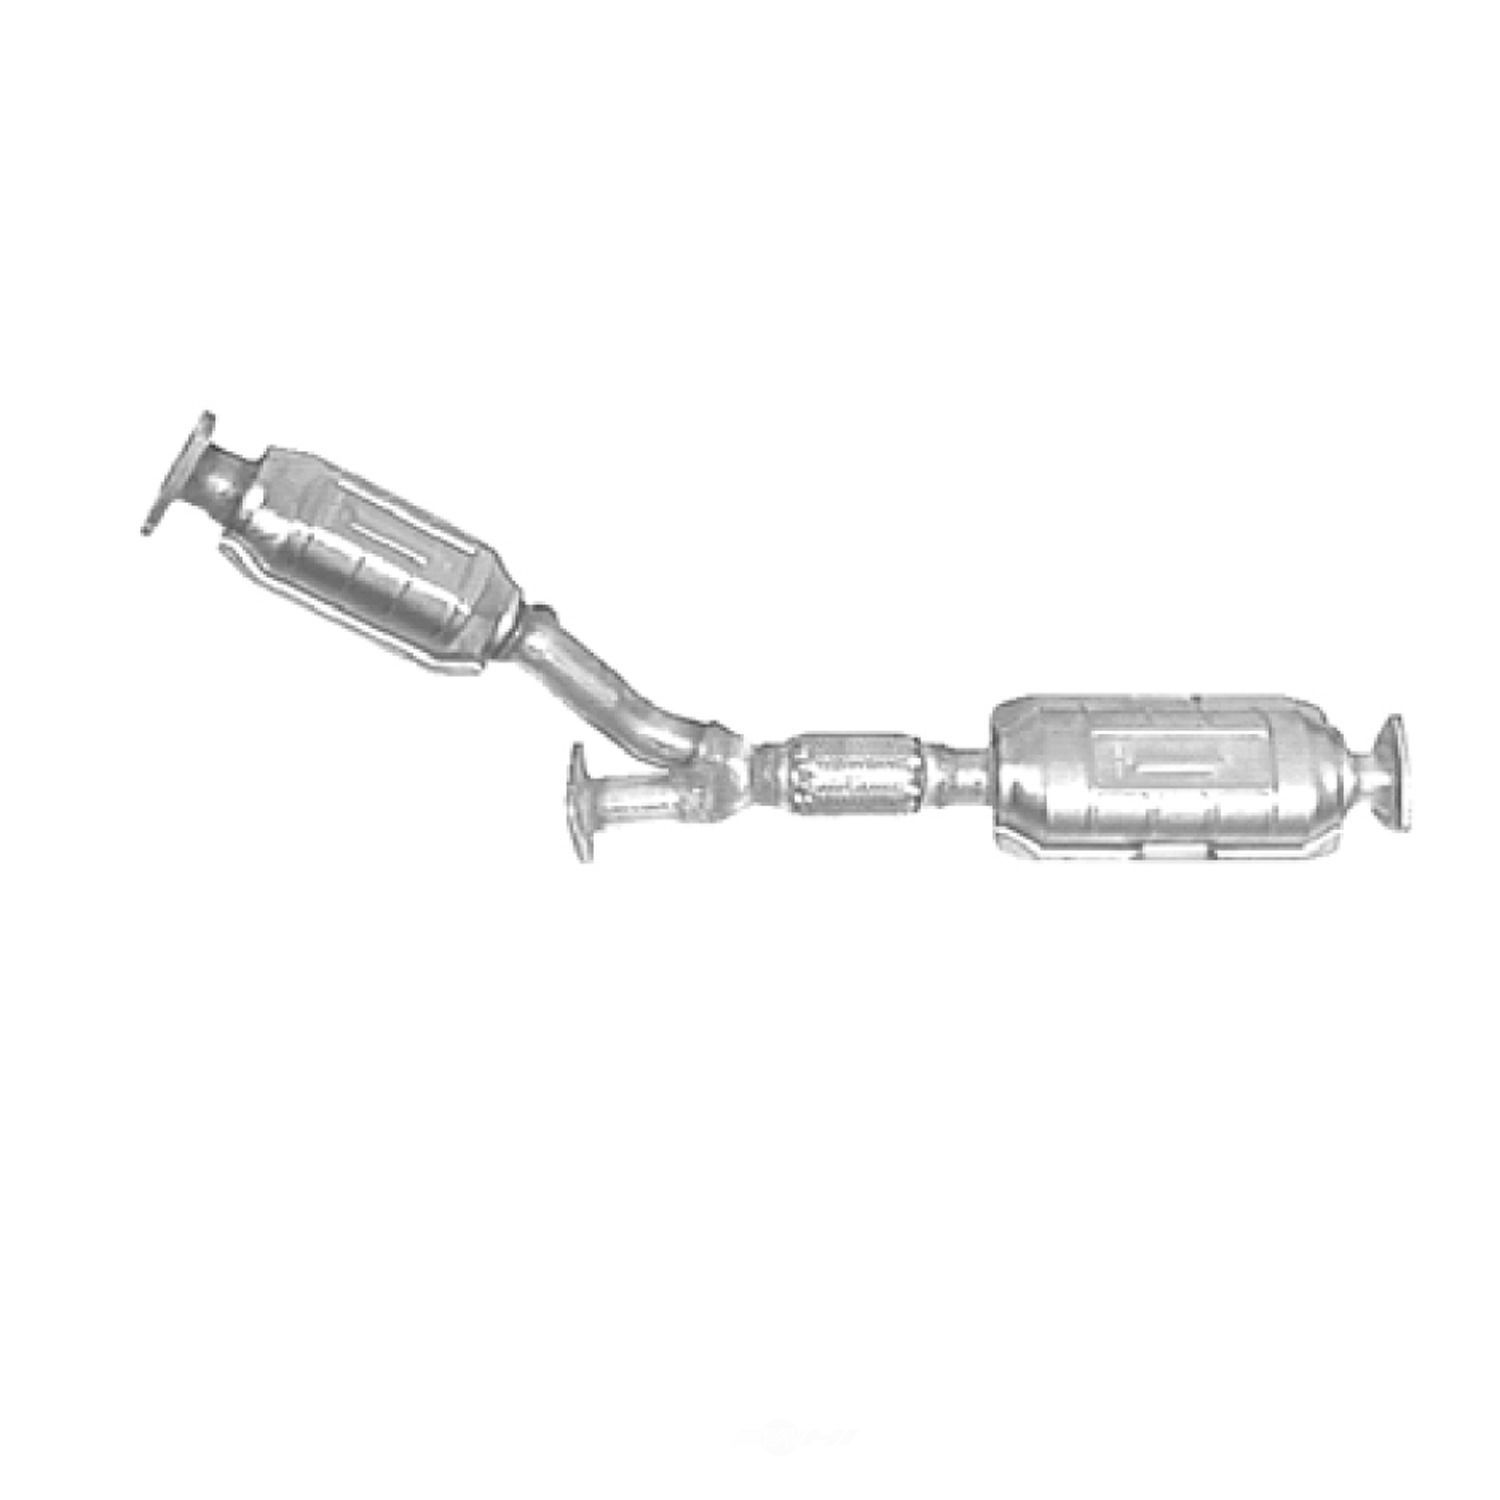 AP EXHAUST W/FEDERAL CONVERTER - Direct Fit Converter - APF 642294